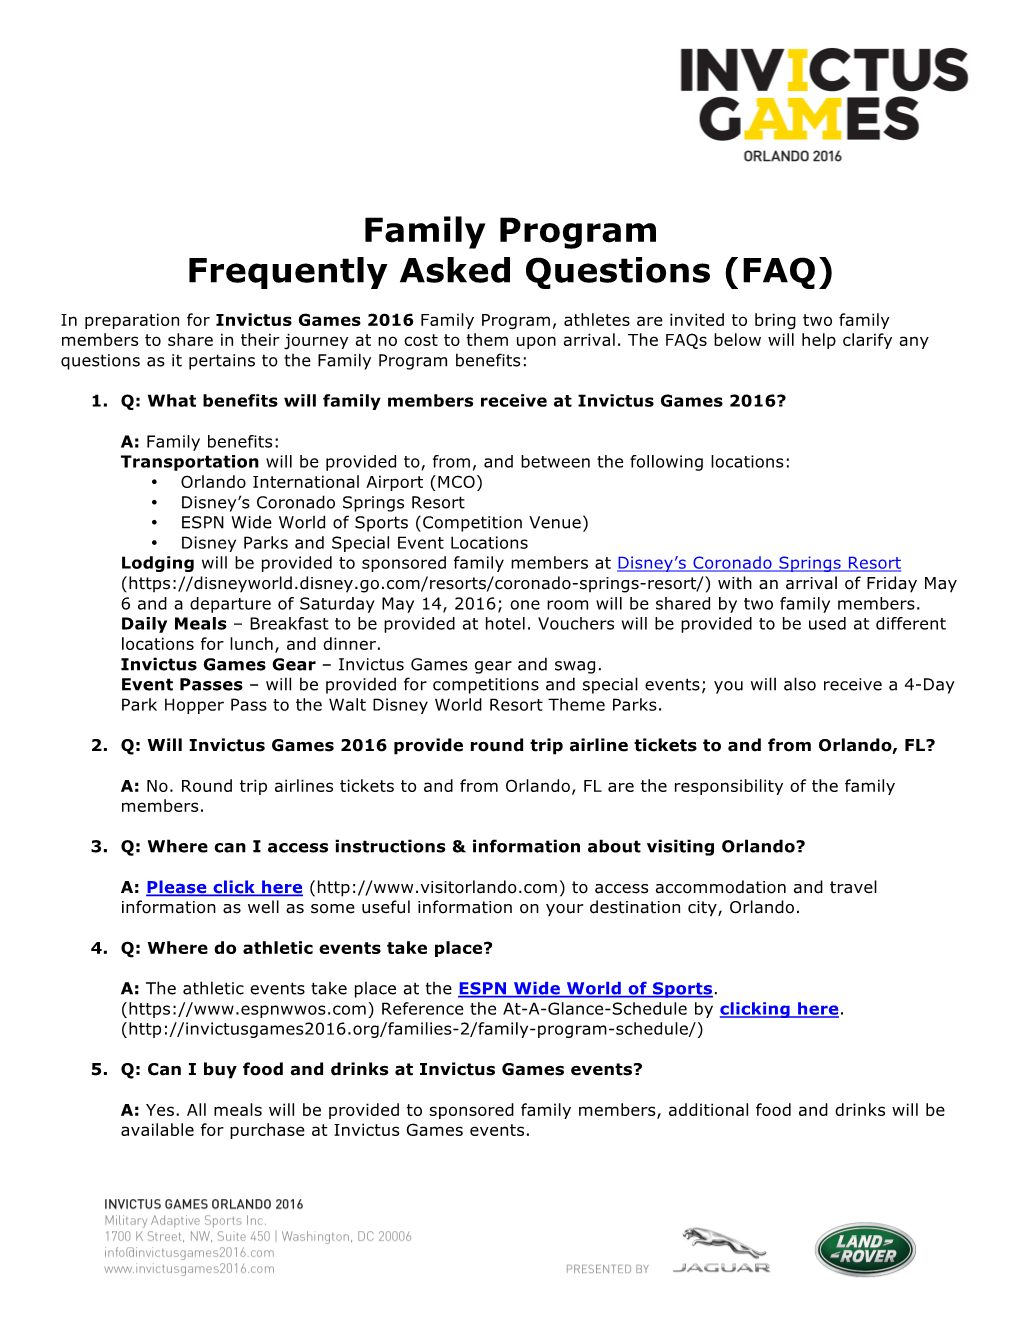 Family Program Frequently Asked Questions (FAQ)